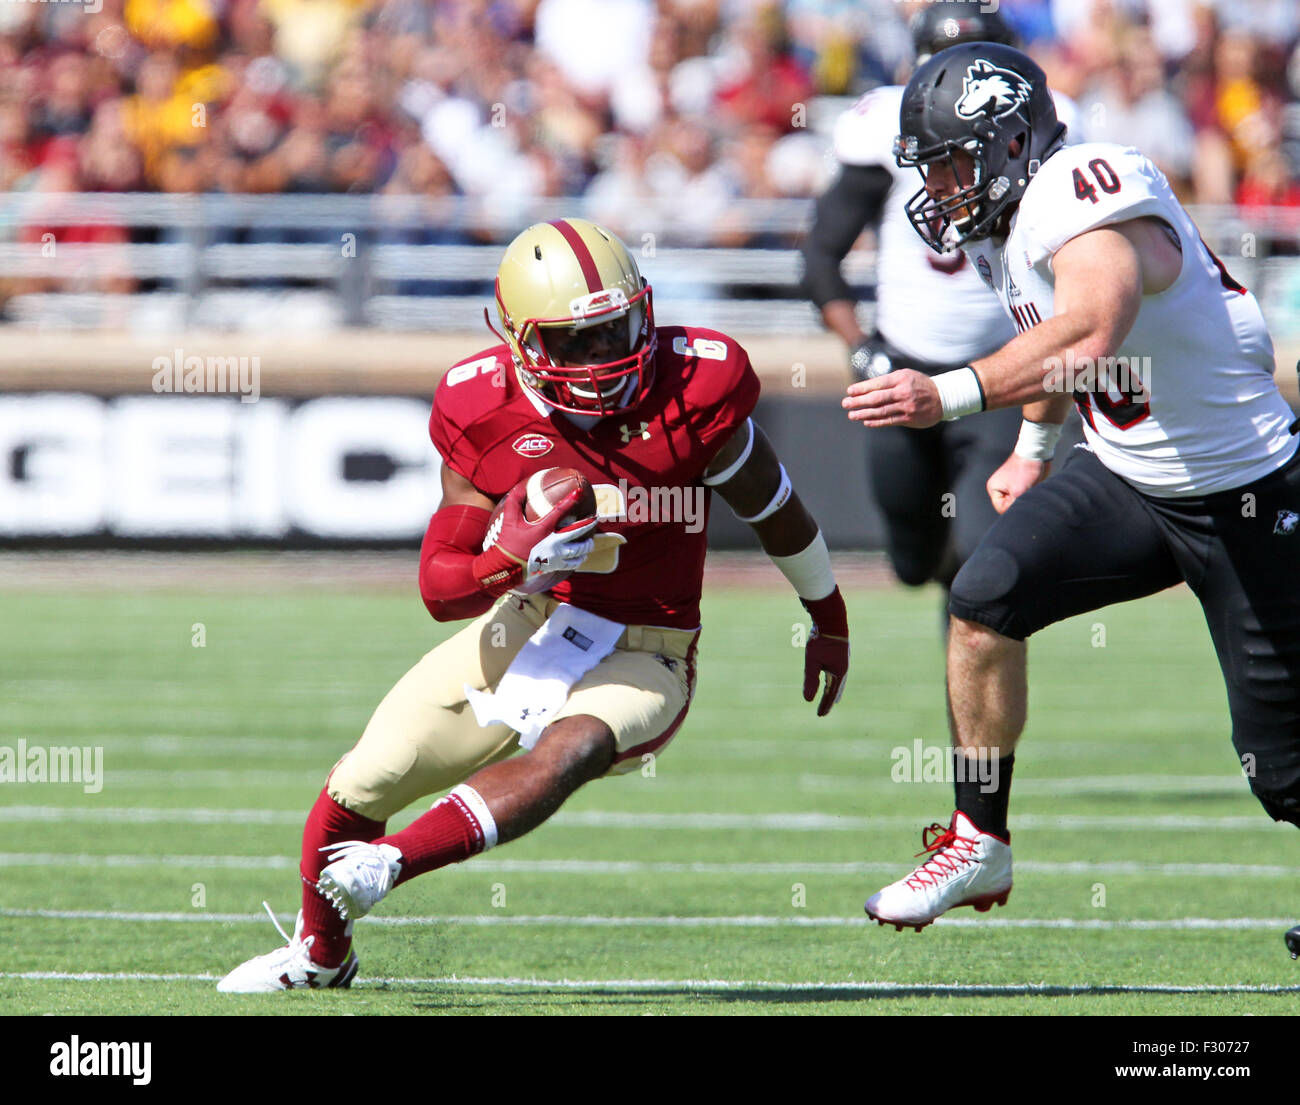 September 26, 2015; Chestnut Hill, MA, USA; Boston College Eagles wide receiver Sherman Alston (6) is pursued by Northern Illinois Huskies linebacker Sean Folliard (40) during the second half of the NCAA football game between the Boston College Eagles and Northern Illinois Huskies at Alumni Stadium. Boston College defeated Northern Illinois 17-14. Anthony Nesmith/Cal Sport Media Stock Photo